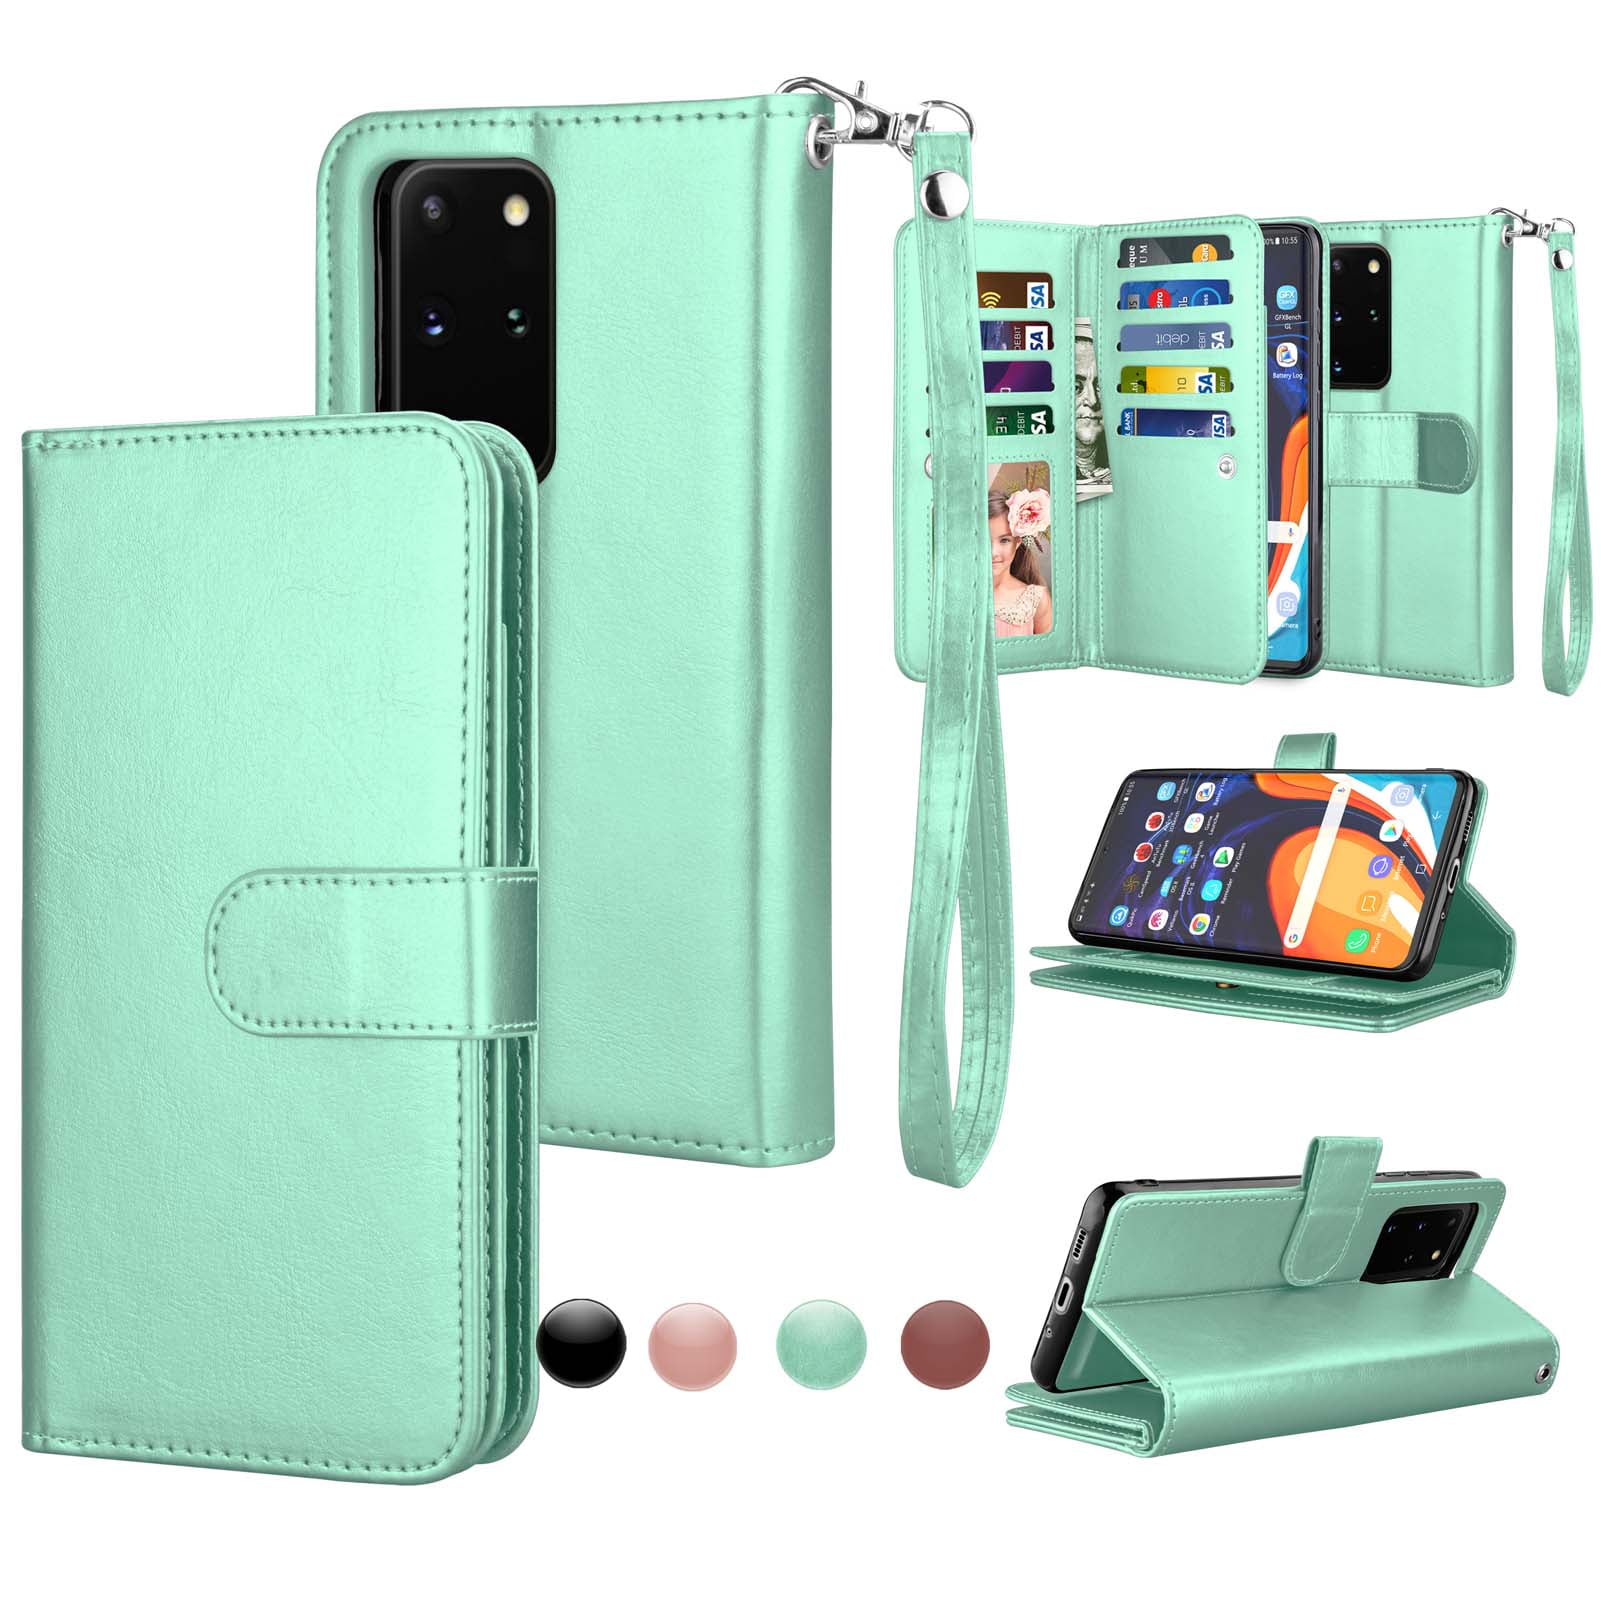 Shockproof Flip Case Cover for Samsung Galaxy S20 Plus Lomogo Leather Wallet Case for Galaxy S20+ S20Plus with Stand Feature Card Holder Magnetic Closure LOBFE150797 L2 